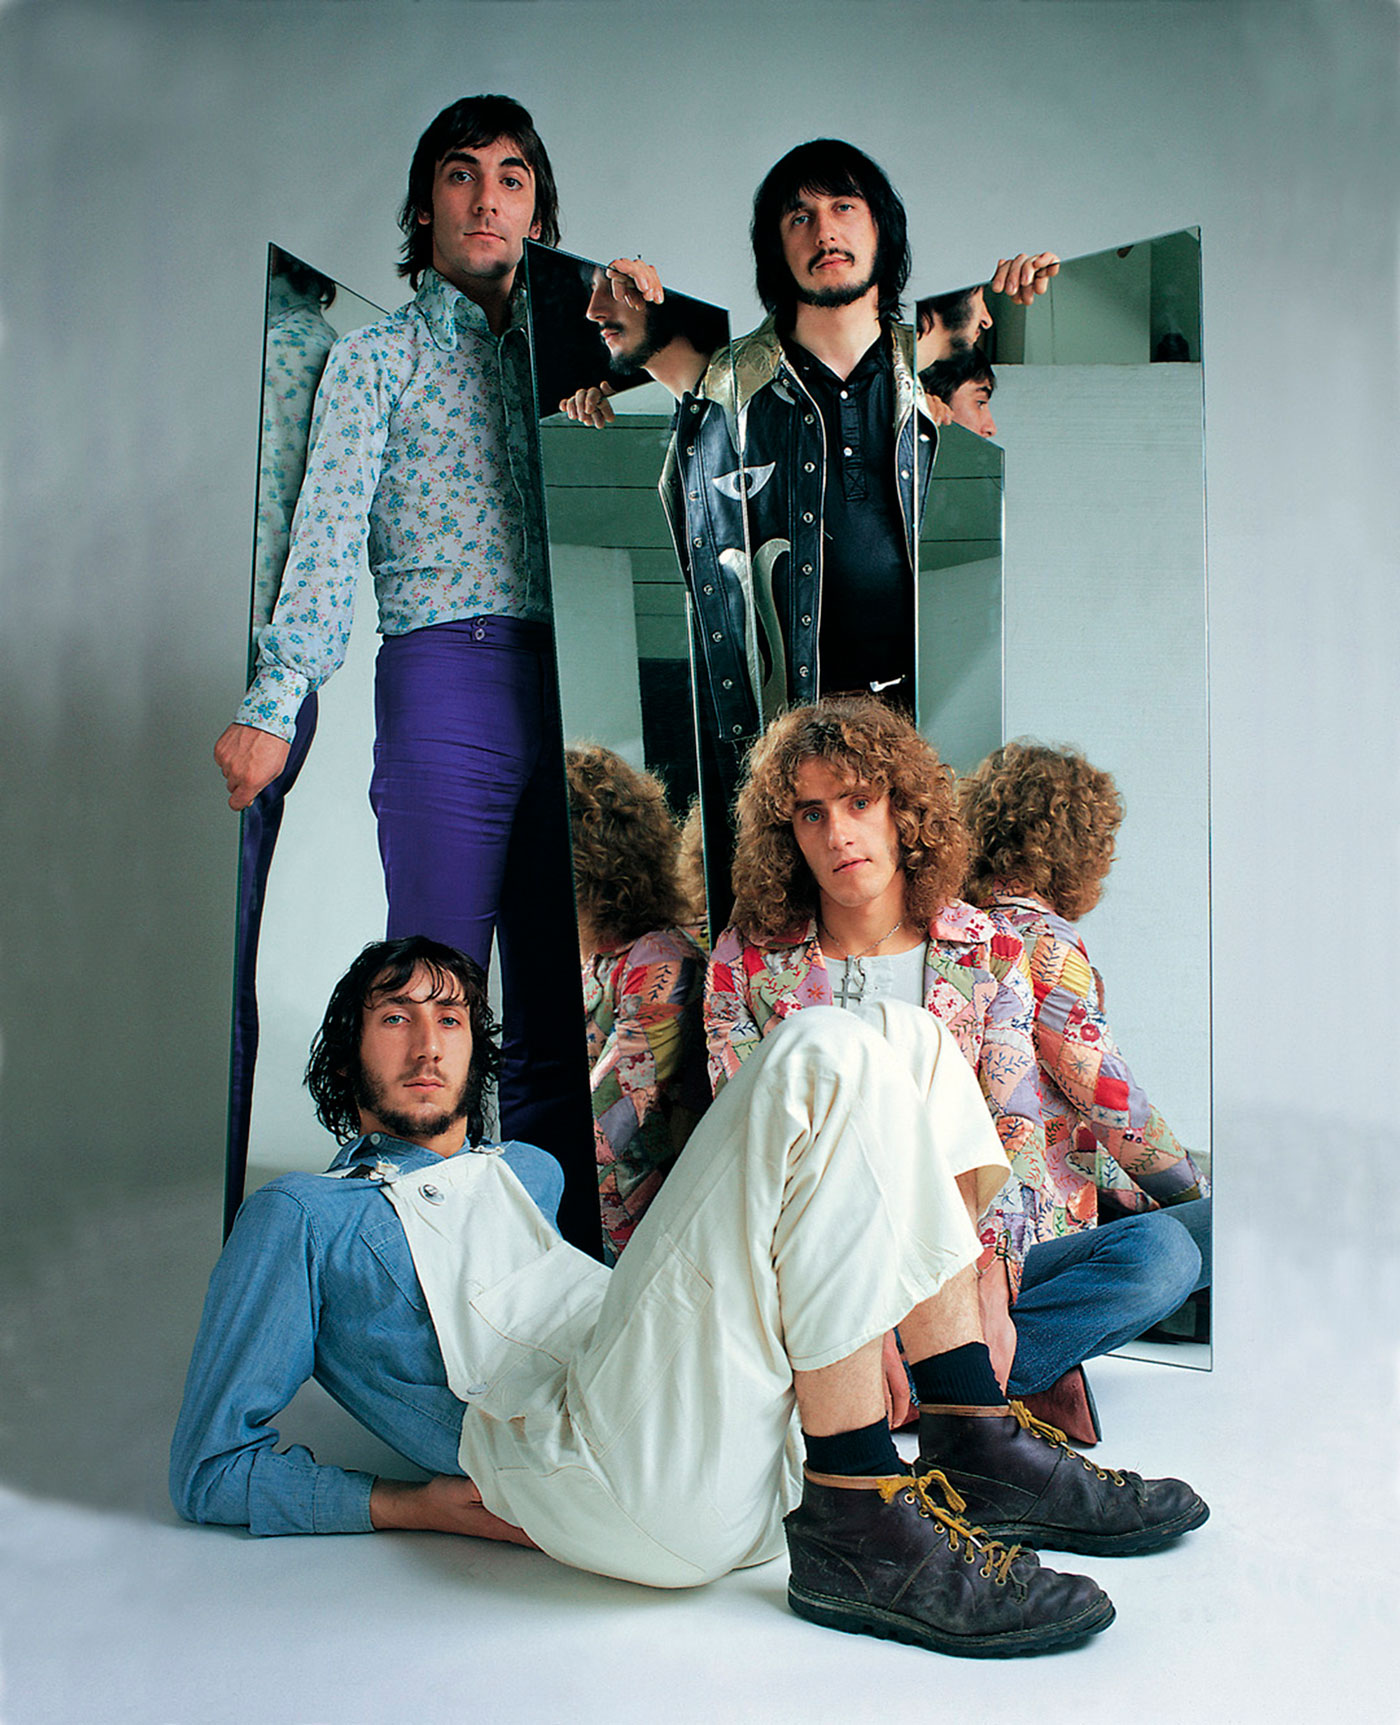 THE WHO IN THE SEVENTIES - The Who